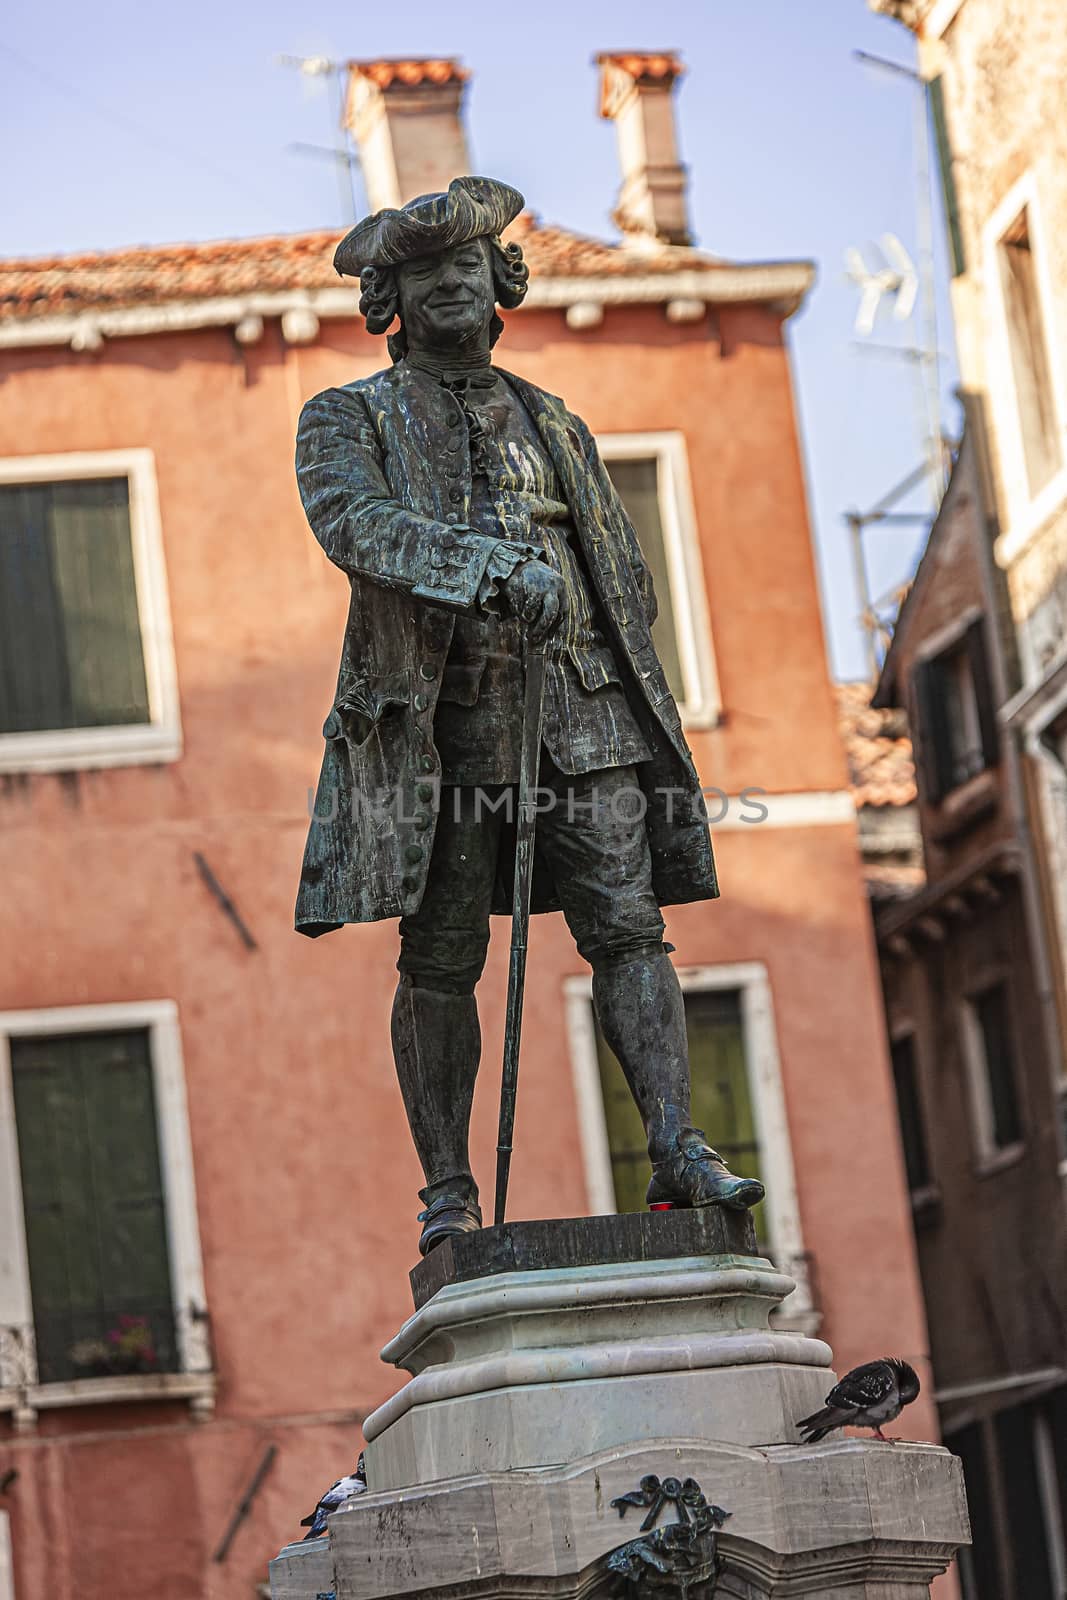 Old and ancient Statue in Venice in Italy during a sunny day